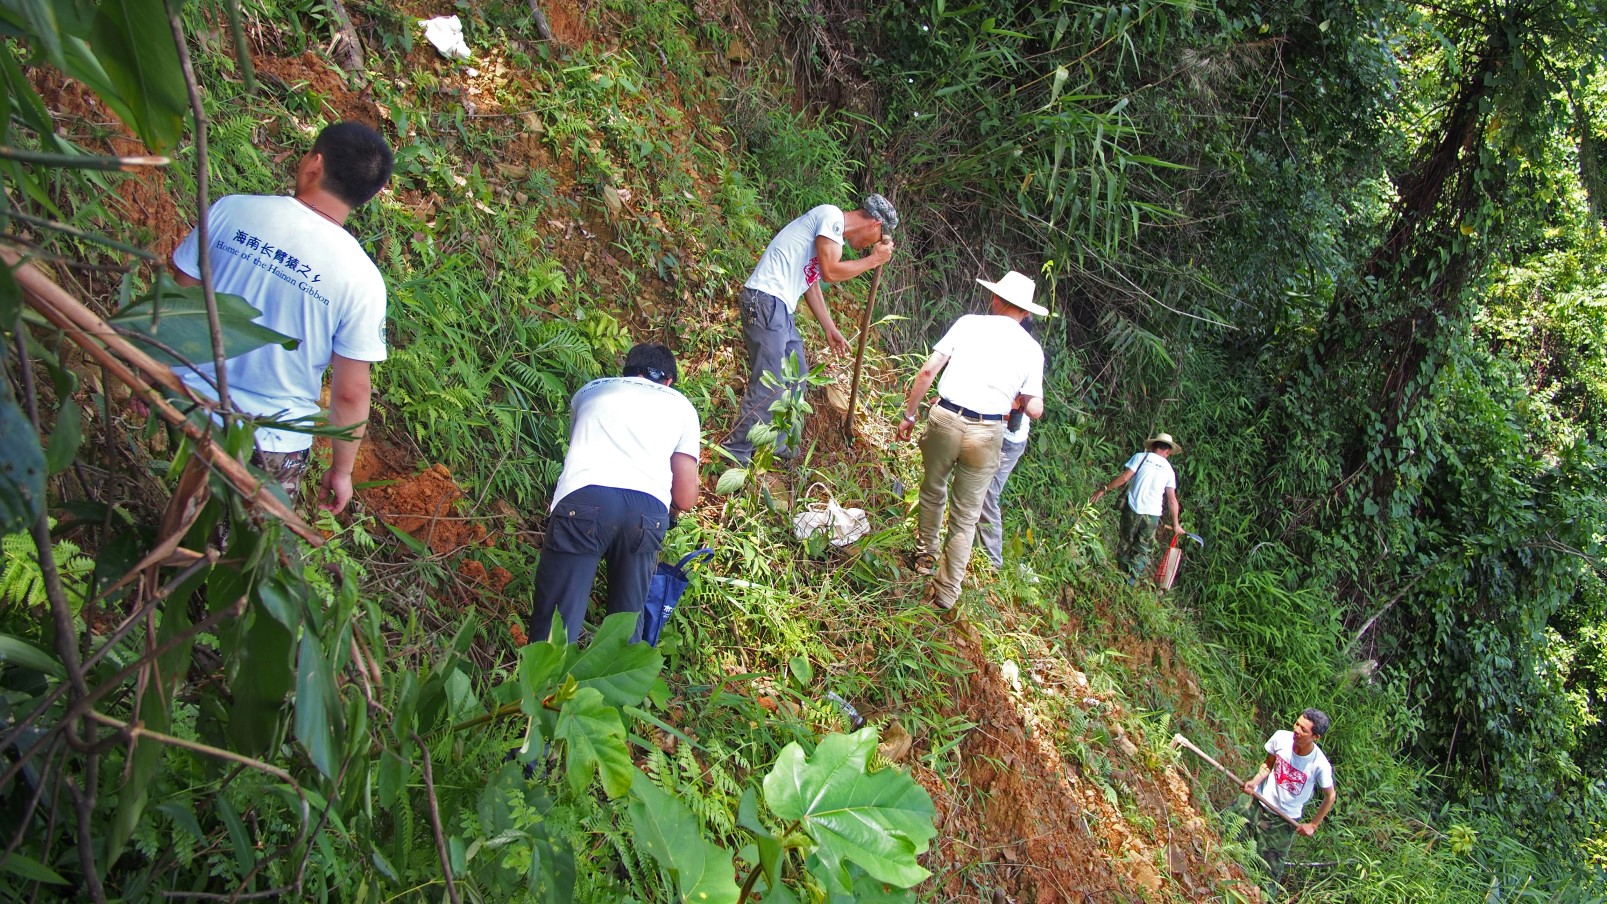 We worked with the nature reserve, local government and local community to plant about 1,200 tree saplings at various landslide areas.